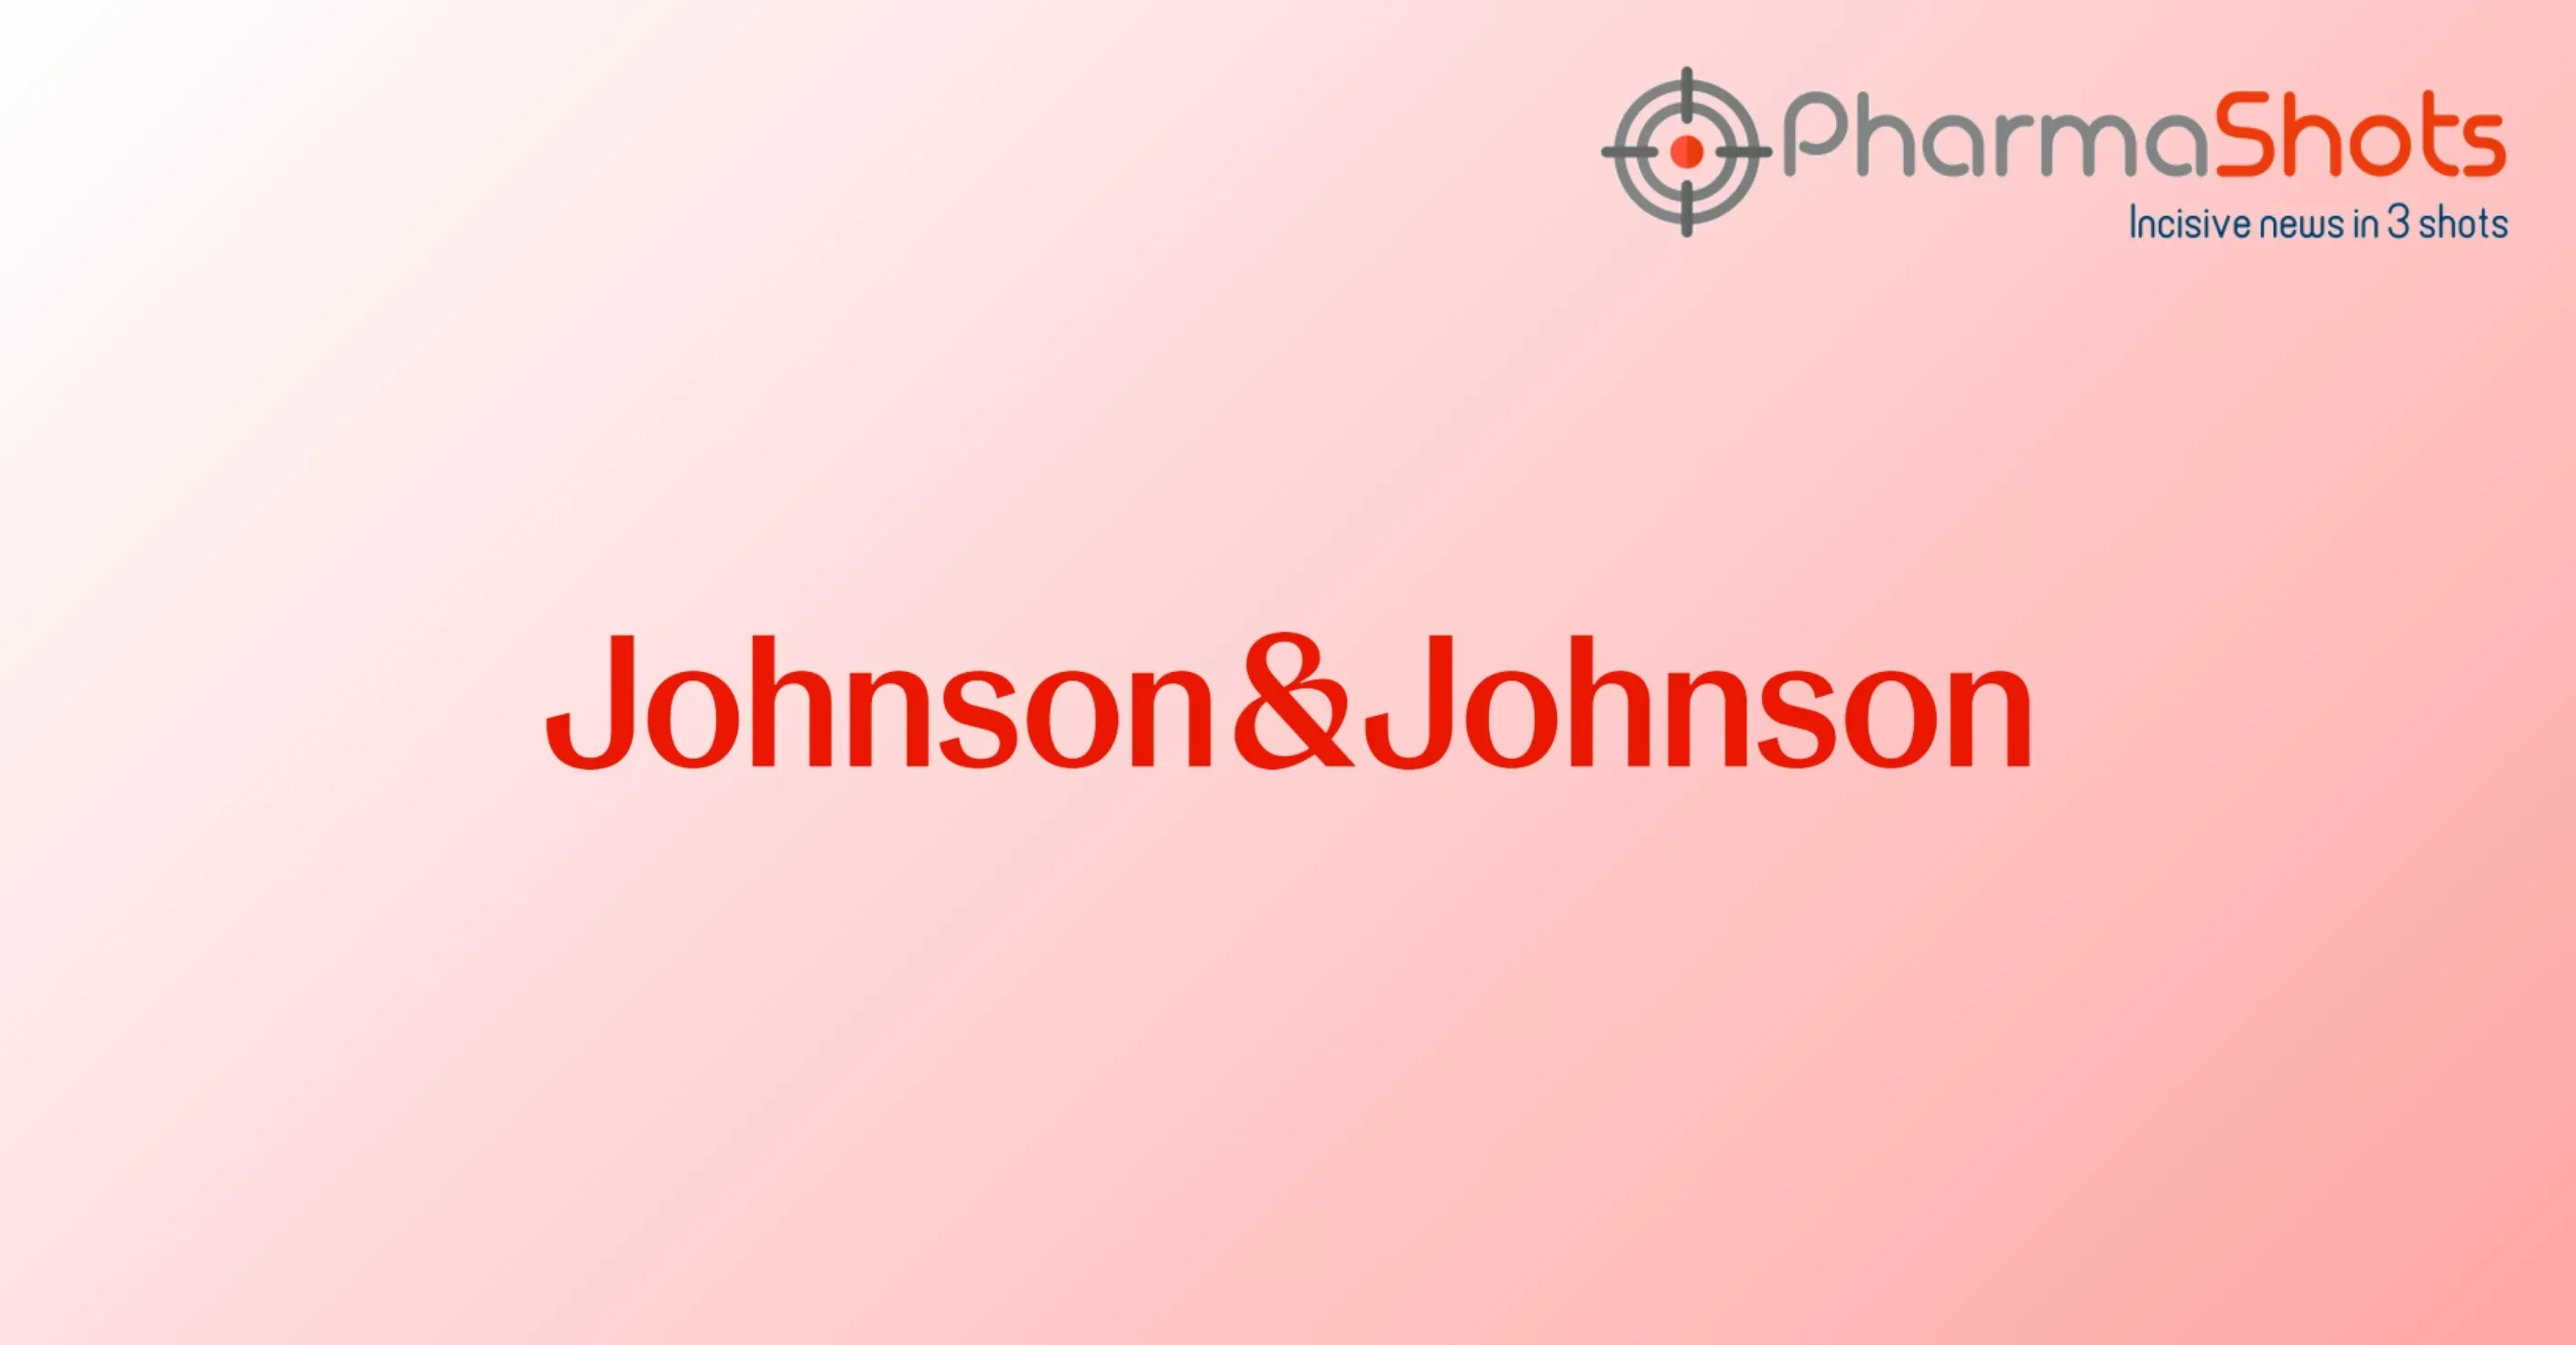 Johnson & Johnson Reports sBLA Submission of Tremfya to the US FDA for Treating Crohn’s Disease